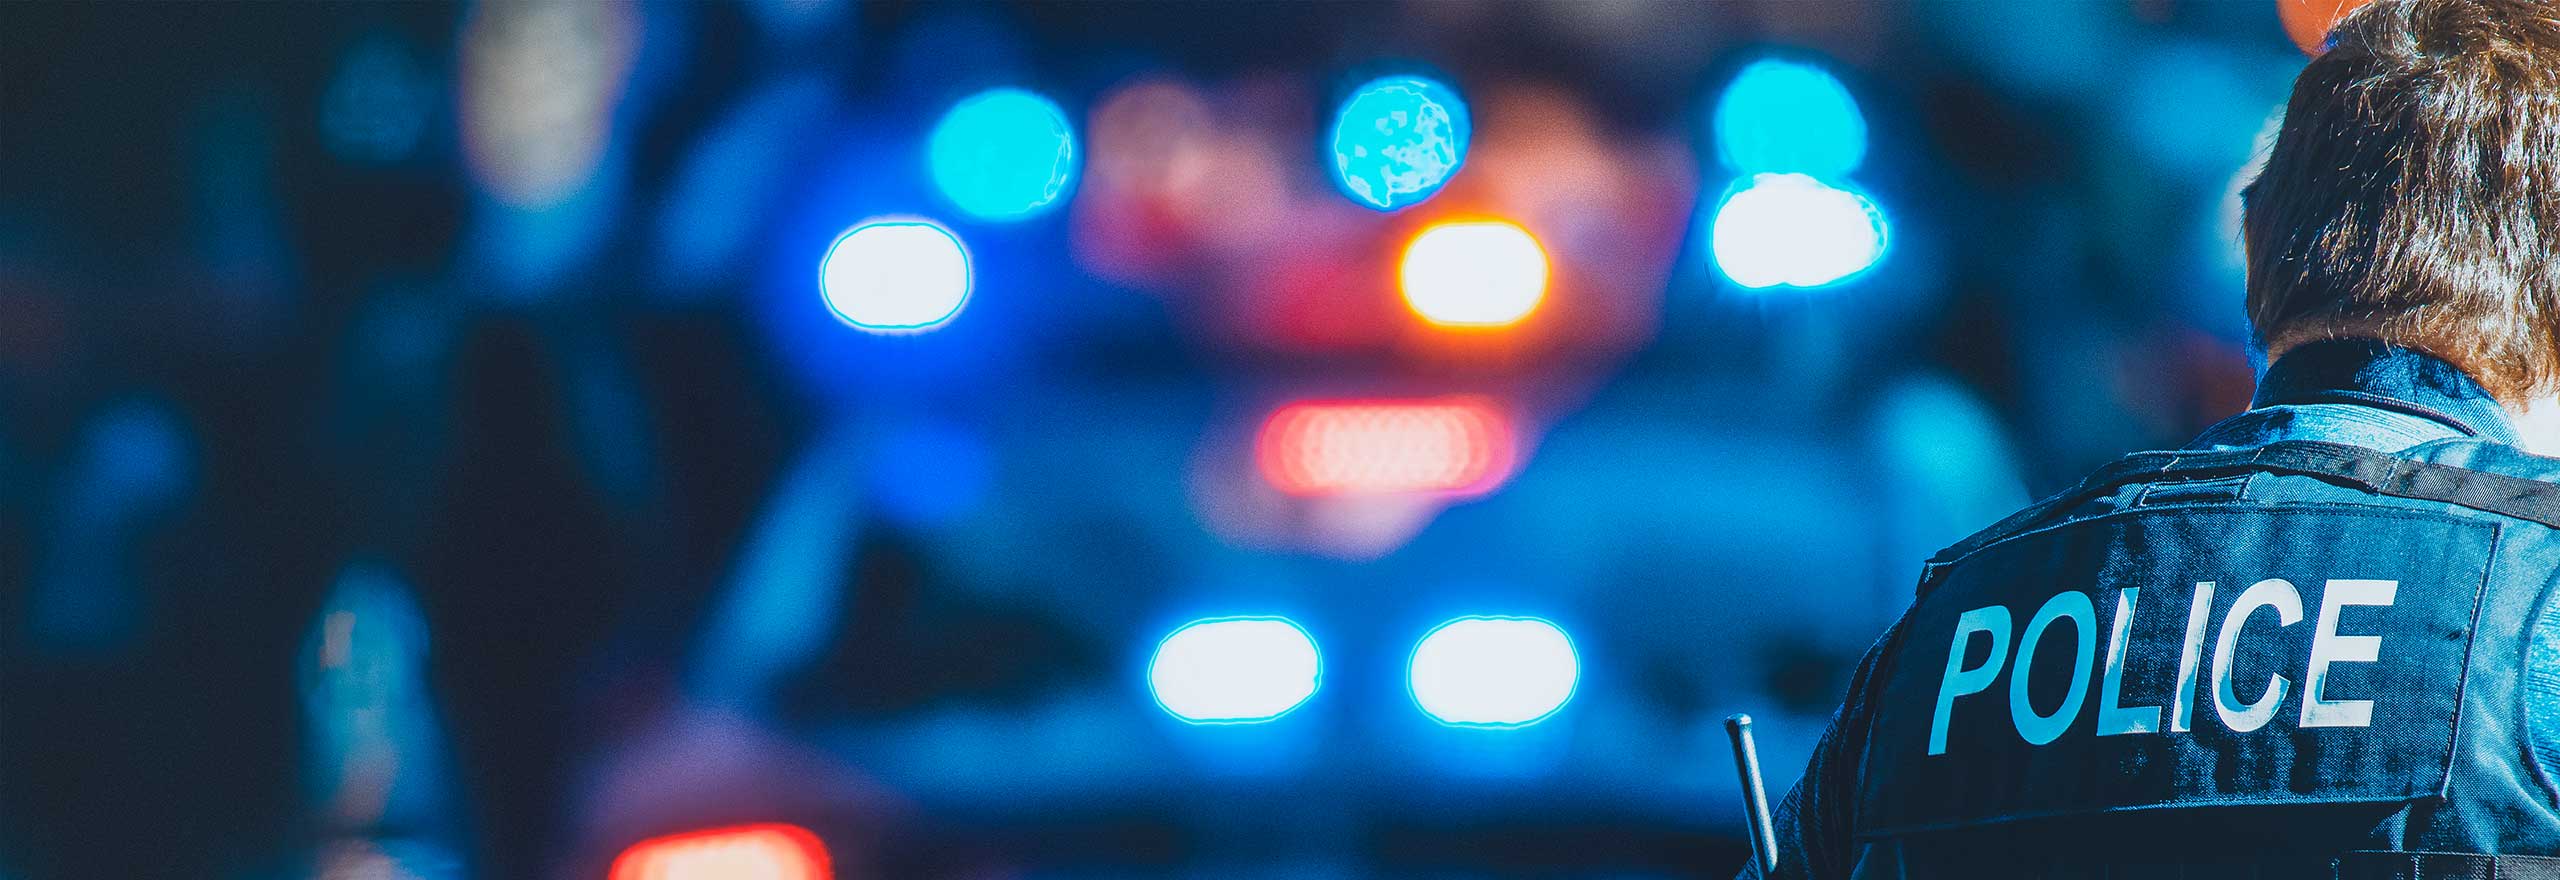 Police car lights glowing blue in nighttime